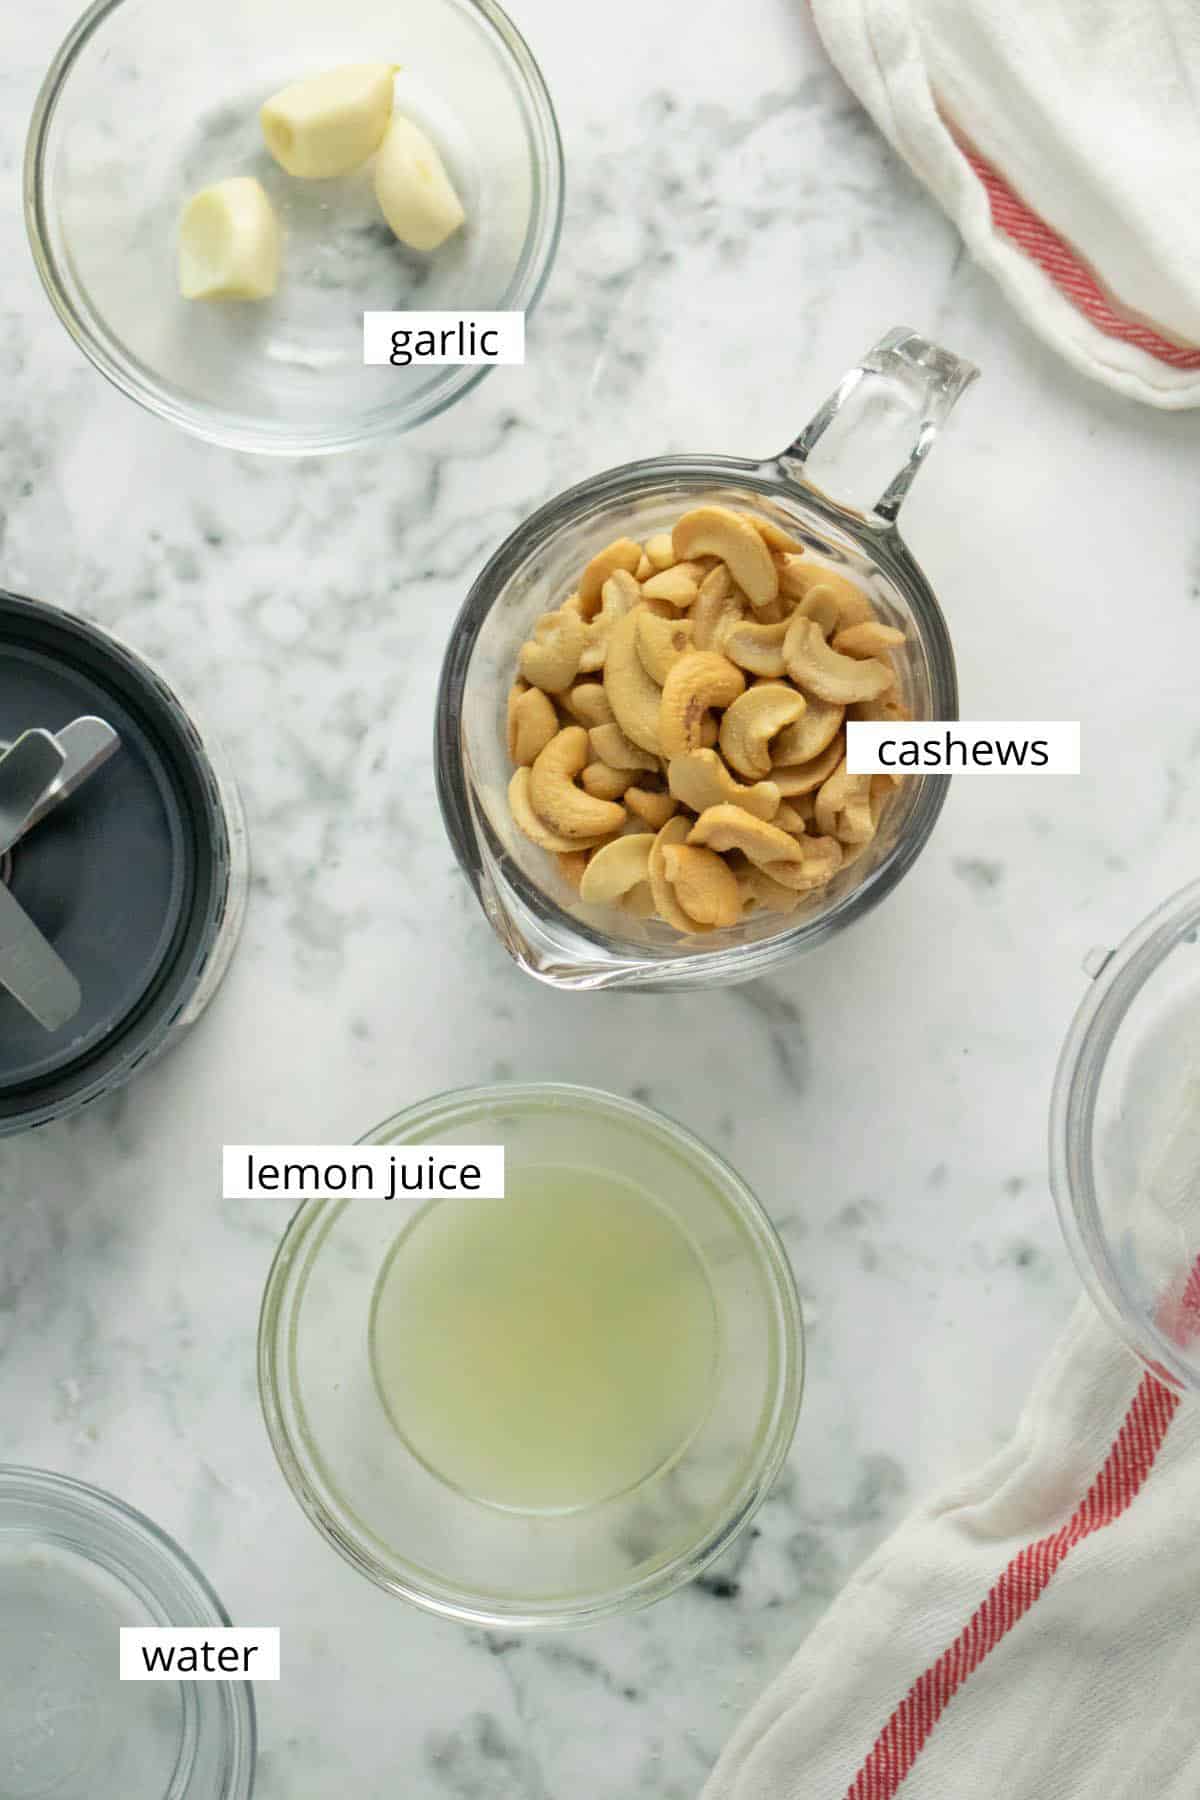 image collage of cashews, lemon juice, garlic, and water in bowls on a table with text labels